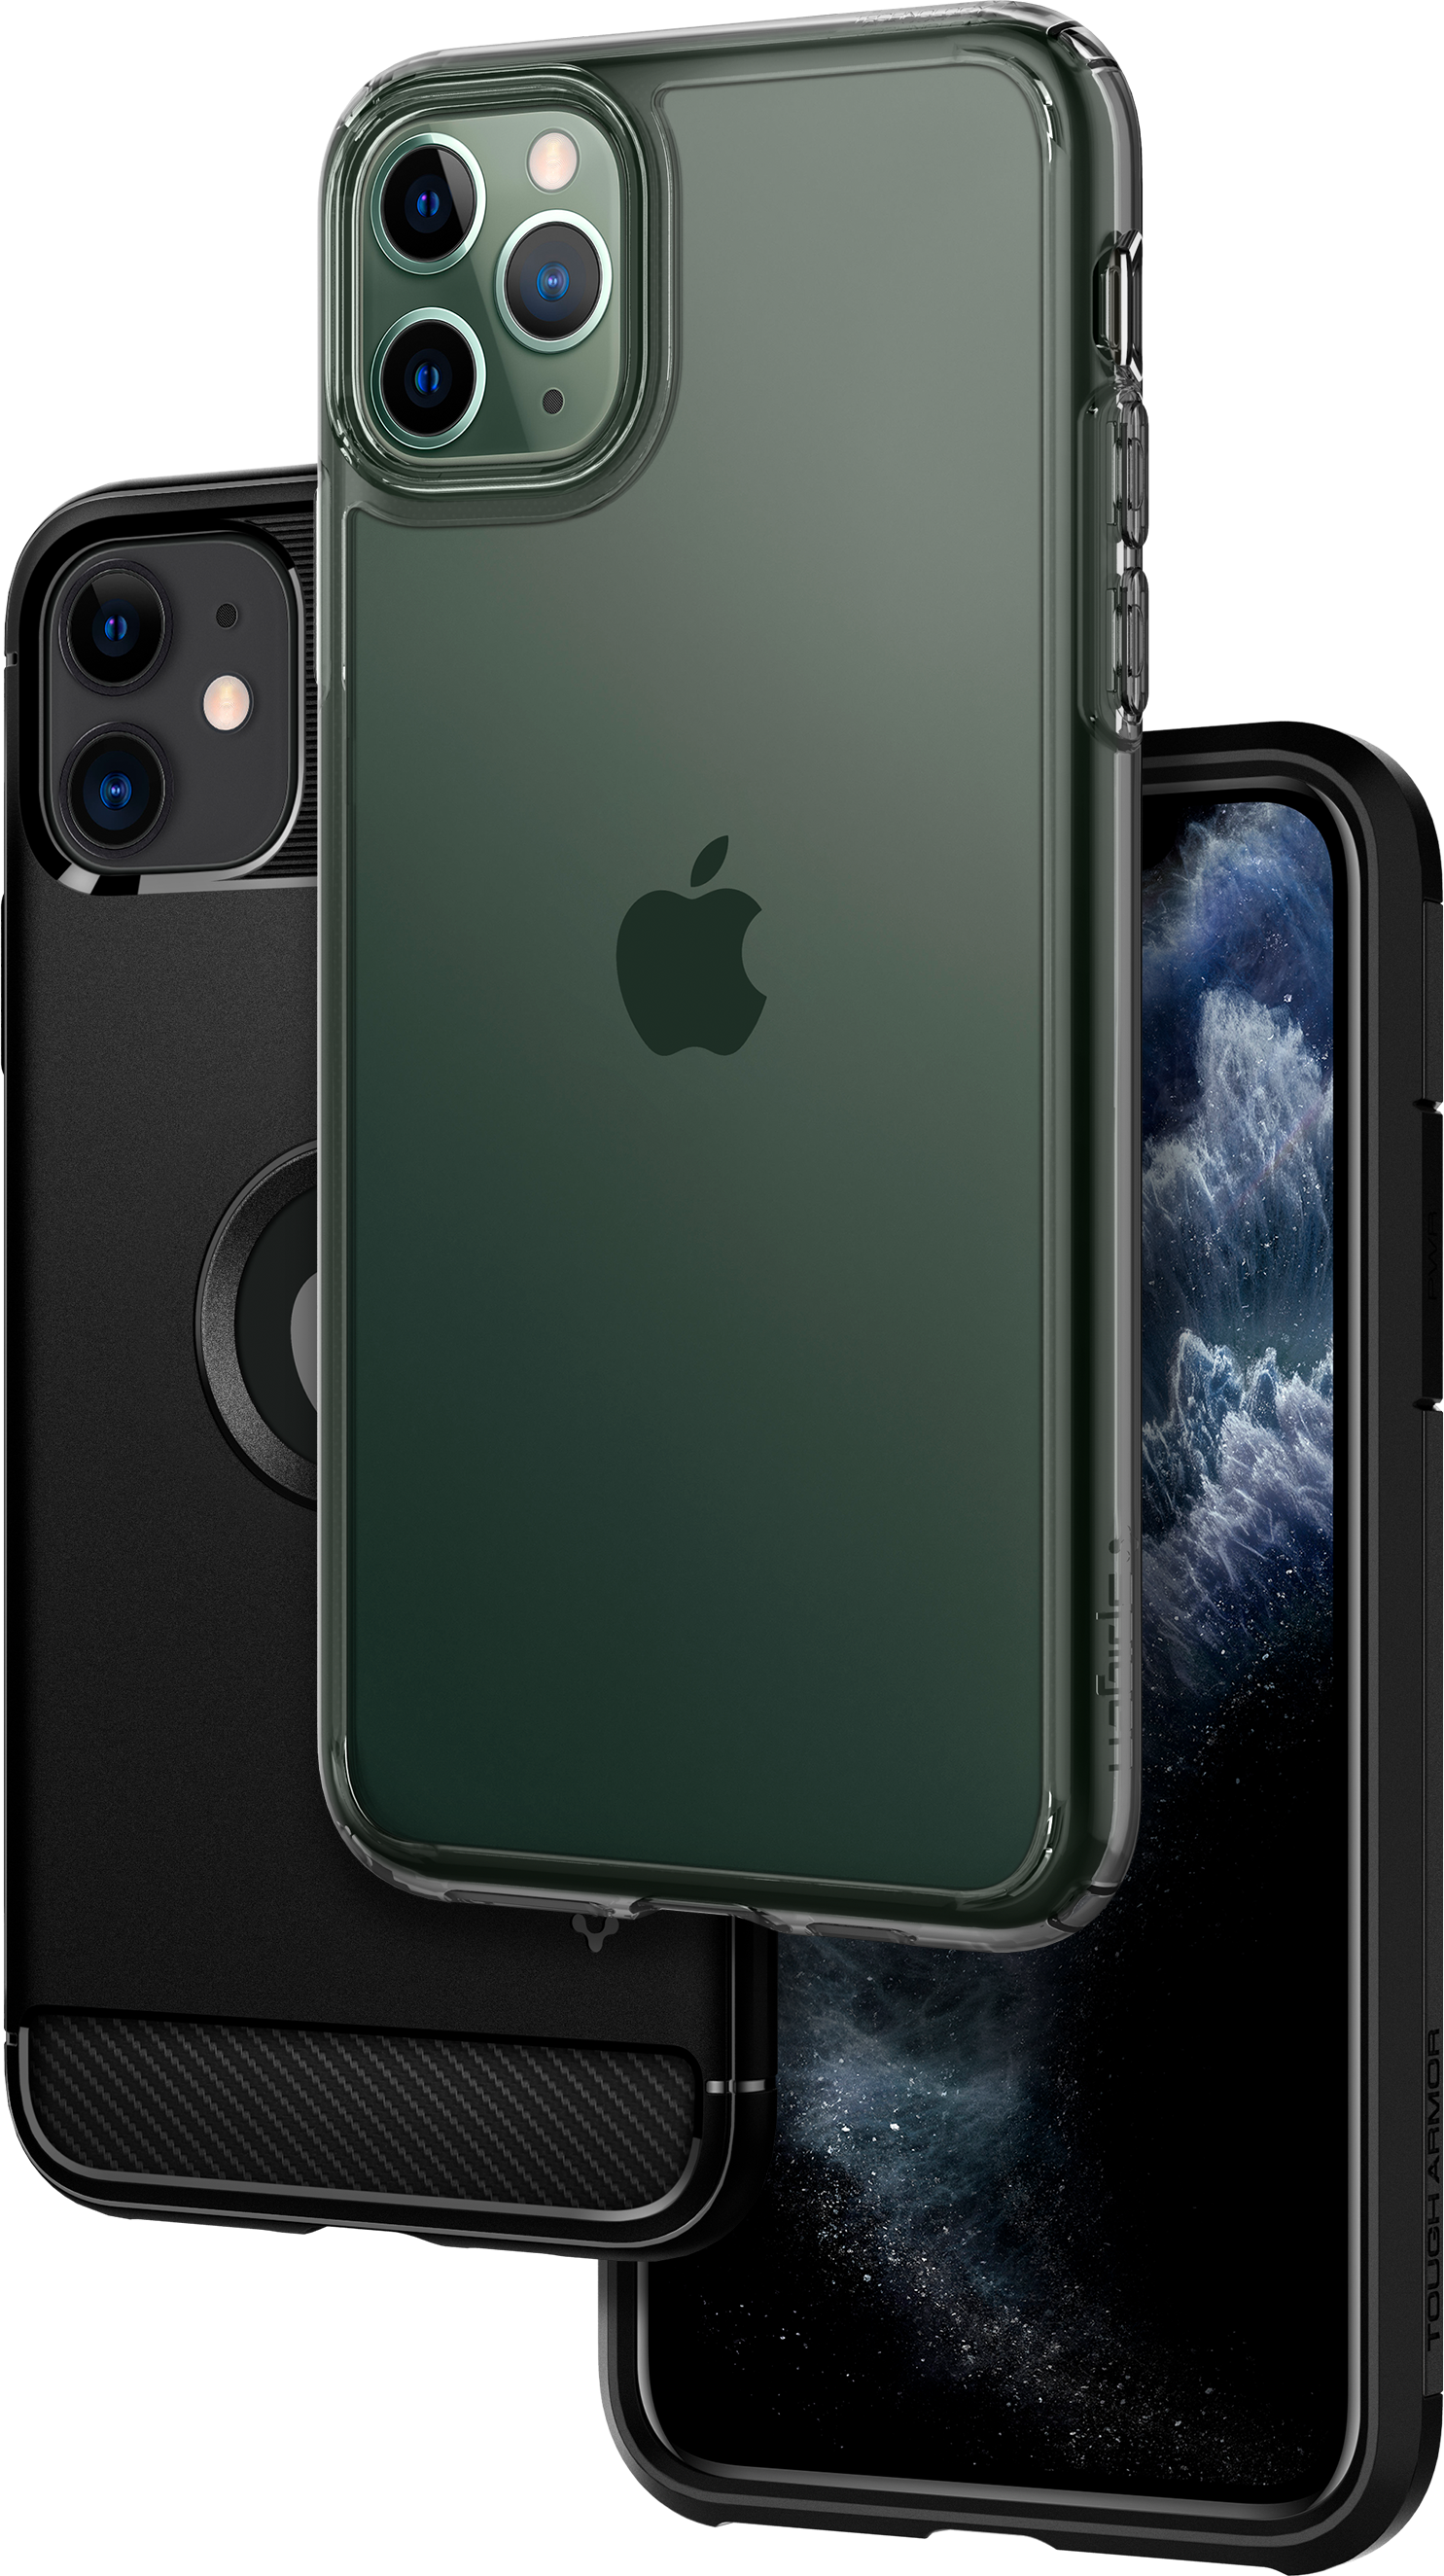 iPhone 11 Main Banner Device Image